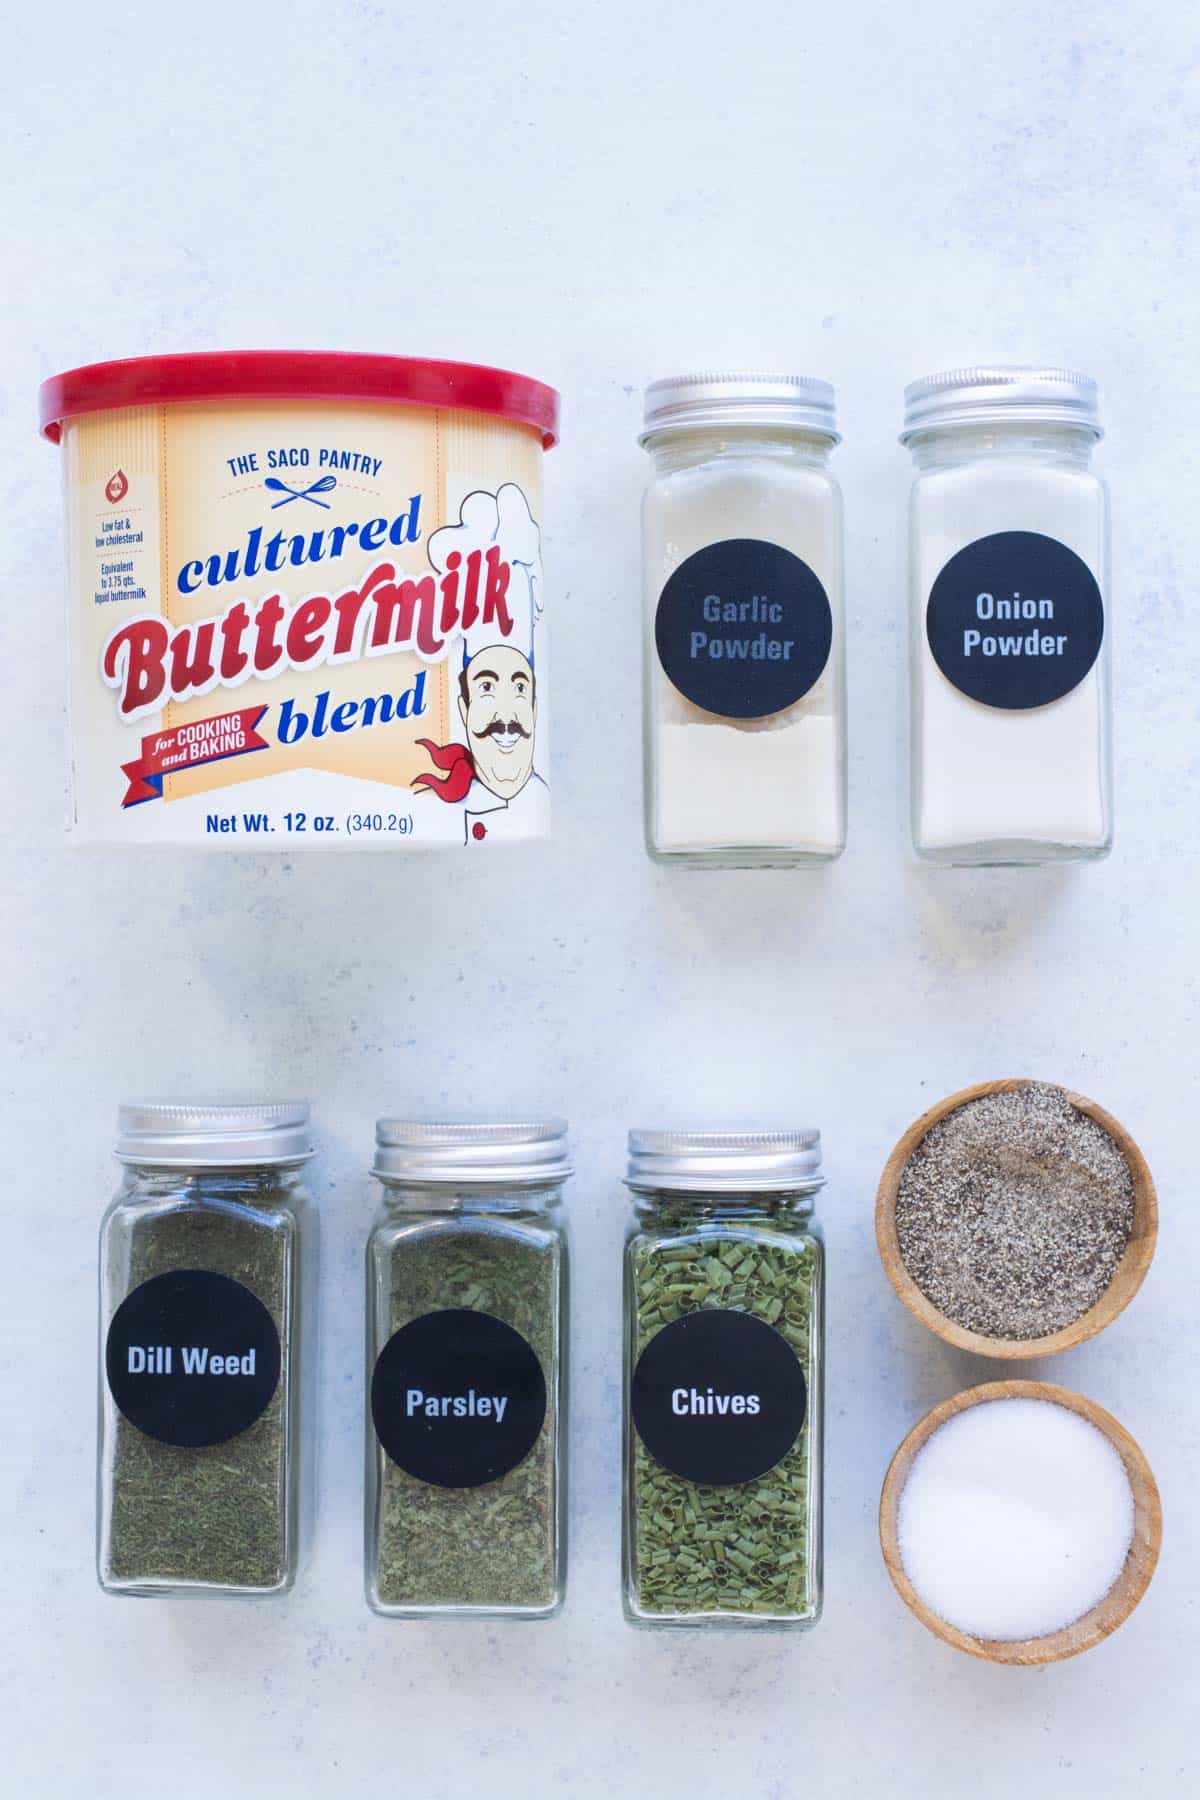 Dried buttermilk, dill, parsley, garlic, and onion are the ingredients for this spice blend.